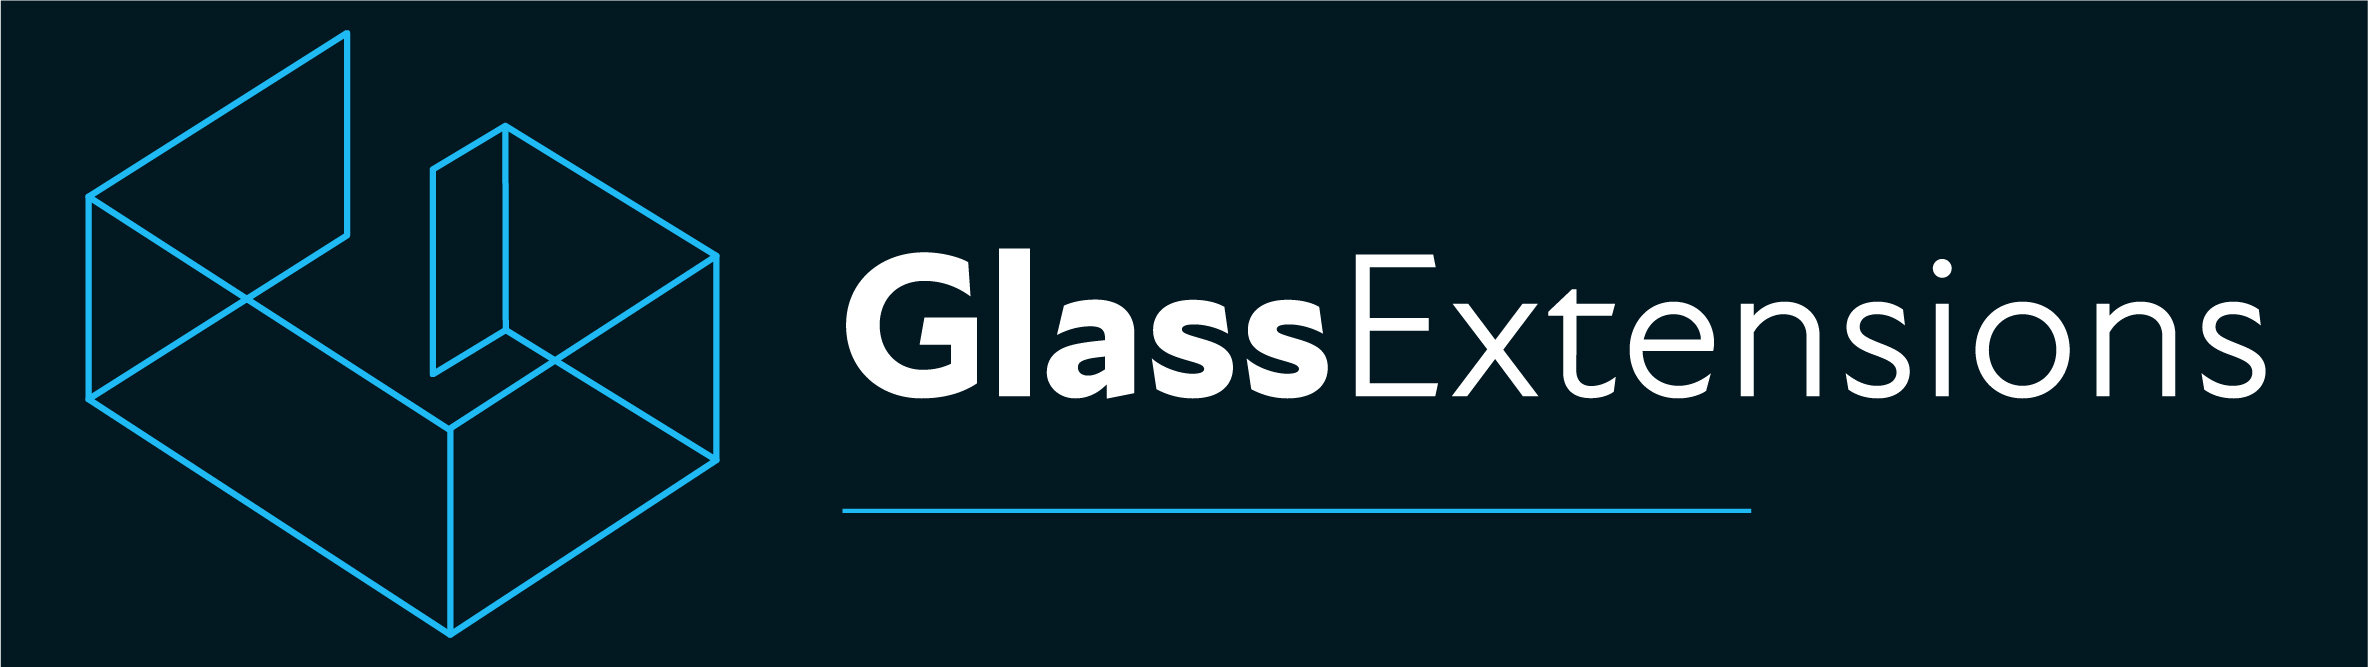 Glass Extensions